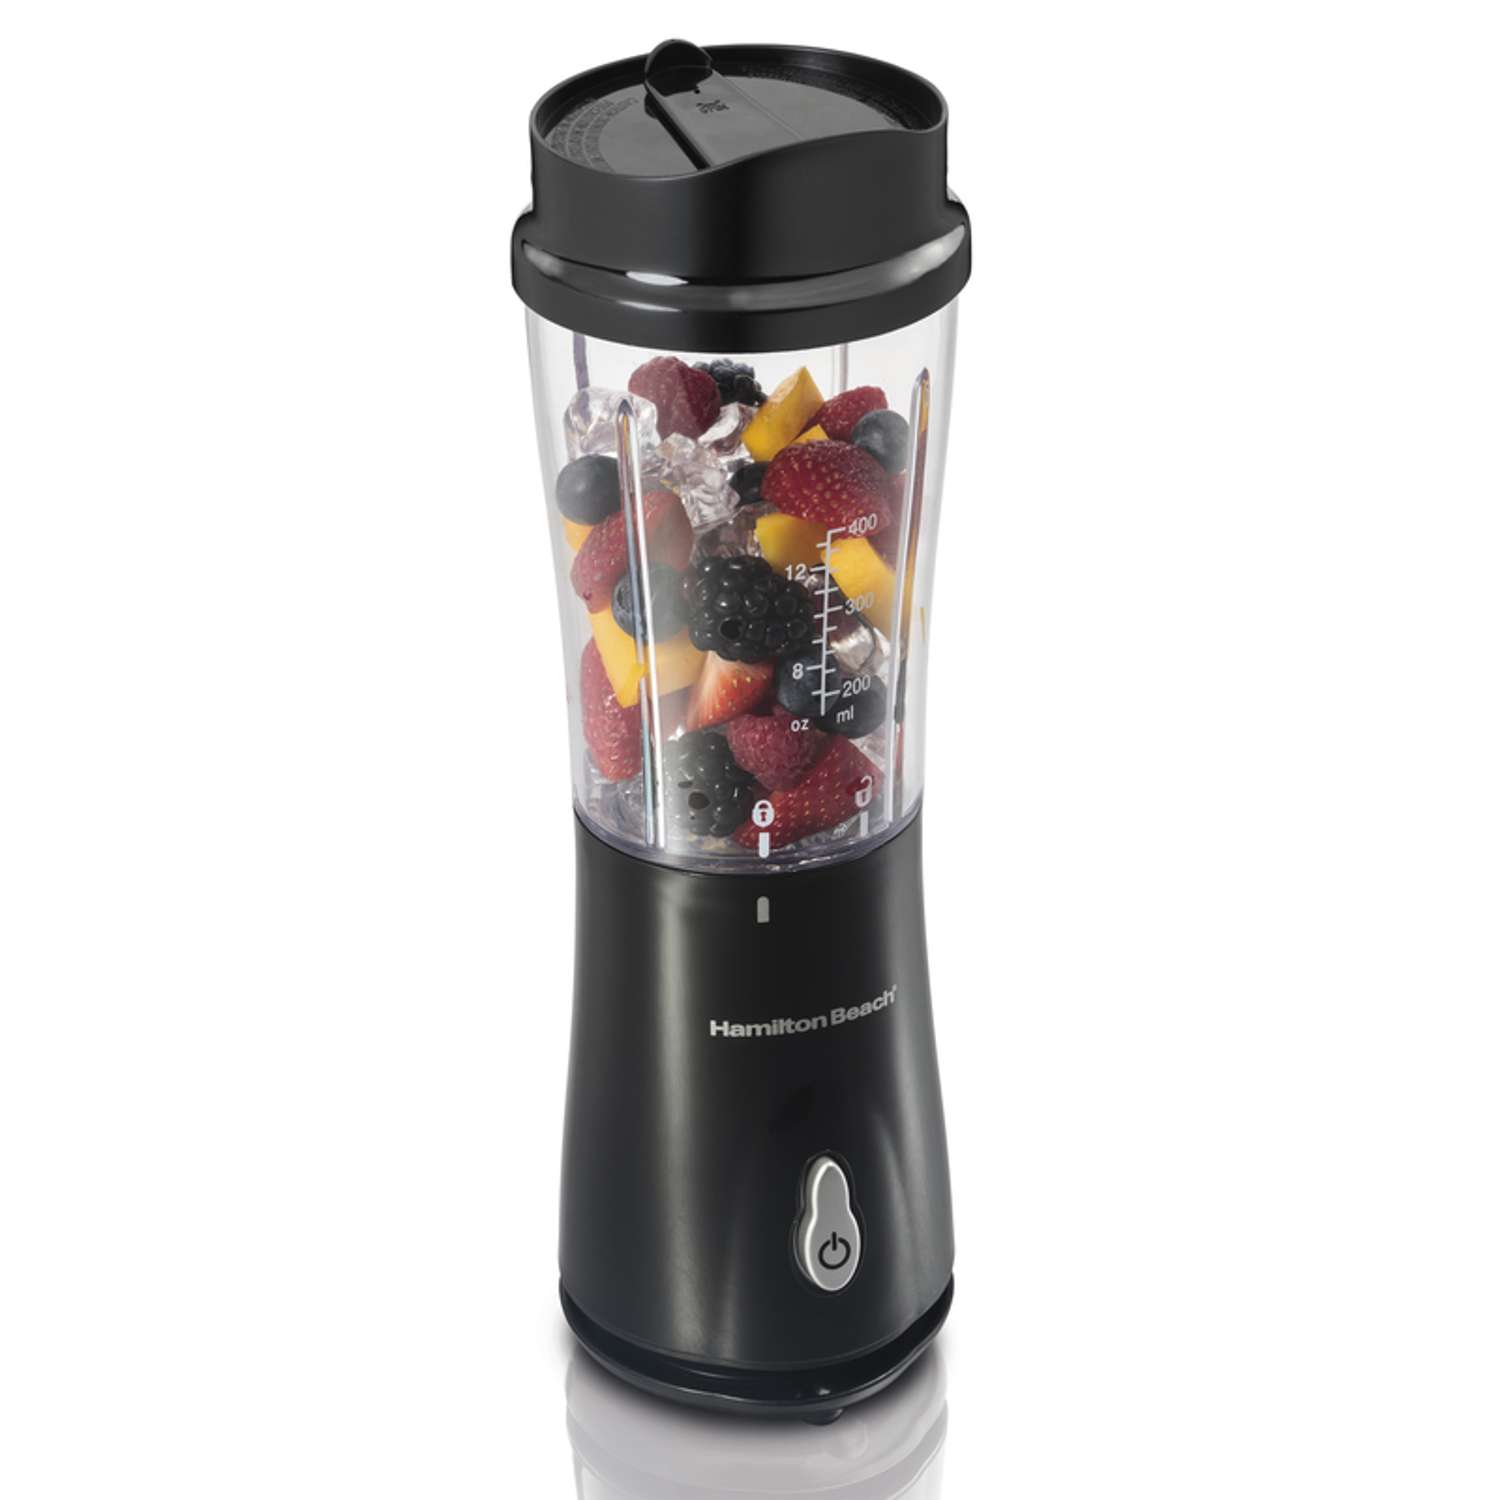 Moss & Stone 2 in 1 Personal Blender with Additional Blender Cup